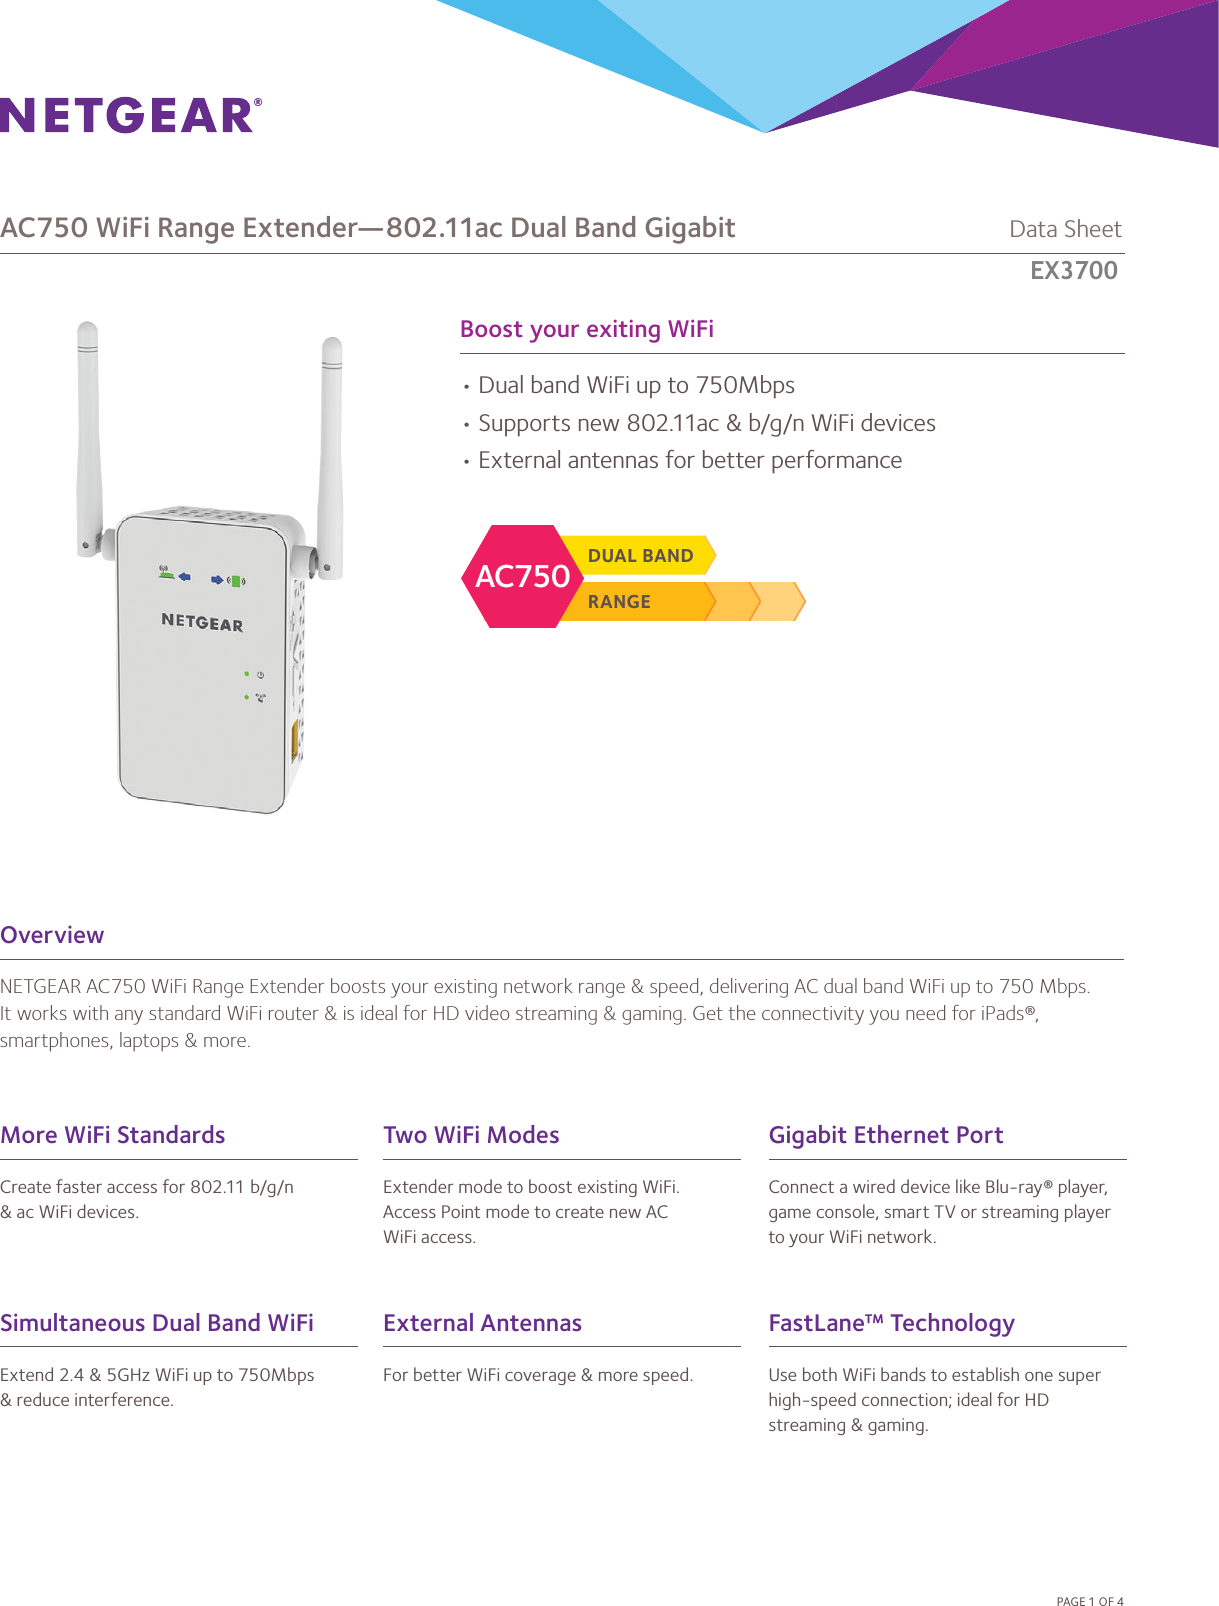 Boost your exiting WiFiOverviewNETGEAR AC750 WiFi Range Extender boosts your existing network range &amp; speed, delivering AC dual band WiFi up to 750 Mbps. It works with any standard WiFi router &amp; is ideal for HD video streaming &amp; gaming. Get the connectivity you need for iPads®, smartphones, laptops &amp; more.• Dual band WiFi up to 750Mbps• Supports new 802.11ac &amp; b/g/n WiFi devices• External antennas for better performancePAGE 1 OF 4RANGEDUAL BANDAC750AC750 WiFi Range Extender—802.11ac Dual Band Gigabit             Data SheetEX6100Simultaneous Dual Band WiFiExtend 2.4 &amp; 5GHz WiFi up to 750Mbps&amp; reduce interference.FastLane™ TechnologyUse both WiFi bands to establish one superhigh-speed connection; ideal for HD streaming &amp; gaming.More WiFi StandardsCreate faster access for 802.11 b/g/n&amp; ac WiFi devices.Gigabit Ethernet PortConnect a wired device like Blu-ray® player,game console, smart TV or streaming playerto your WiFi network.External AntennasFor better WiFi coverage &amp; more speed.Two WiFi ModesExtender mode to boost existing WiFi. Access Point mode to create new AC WiFi access.EX3700  